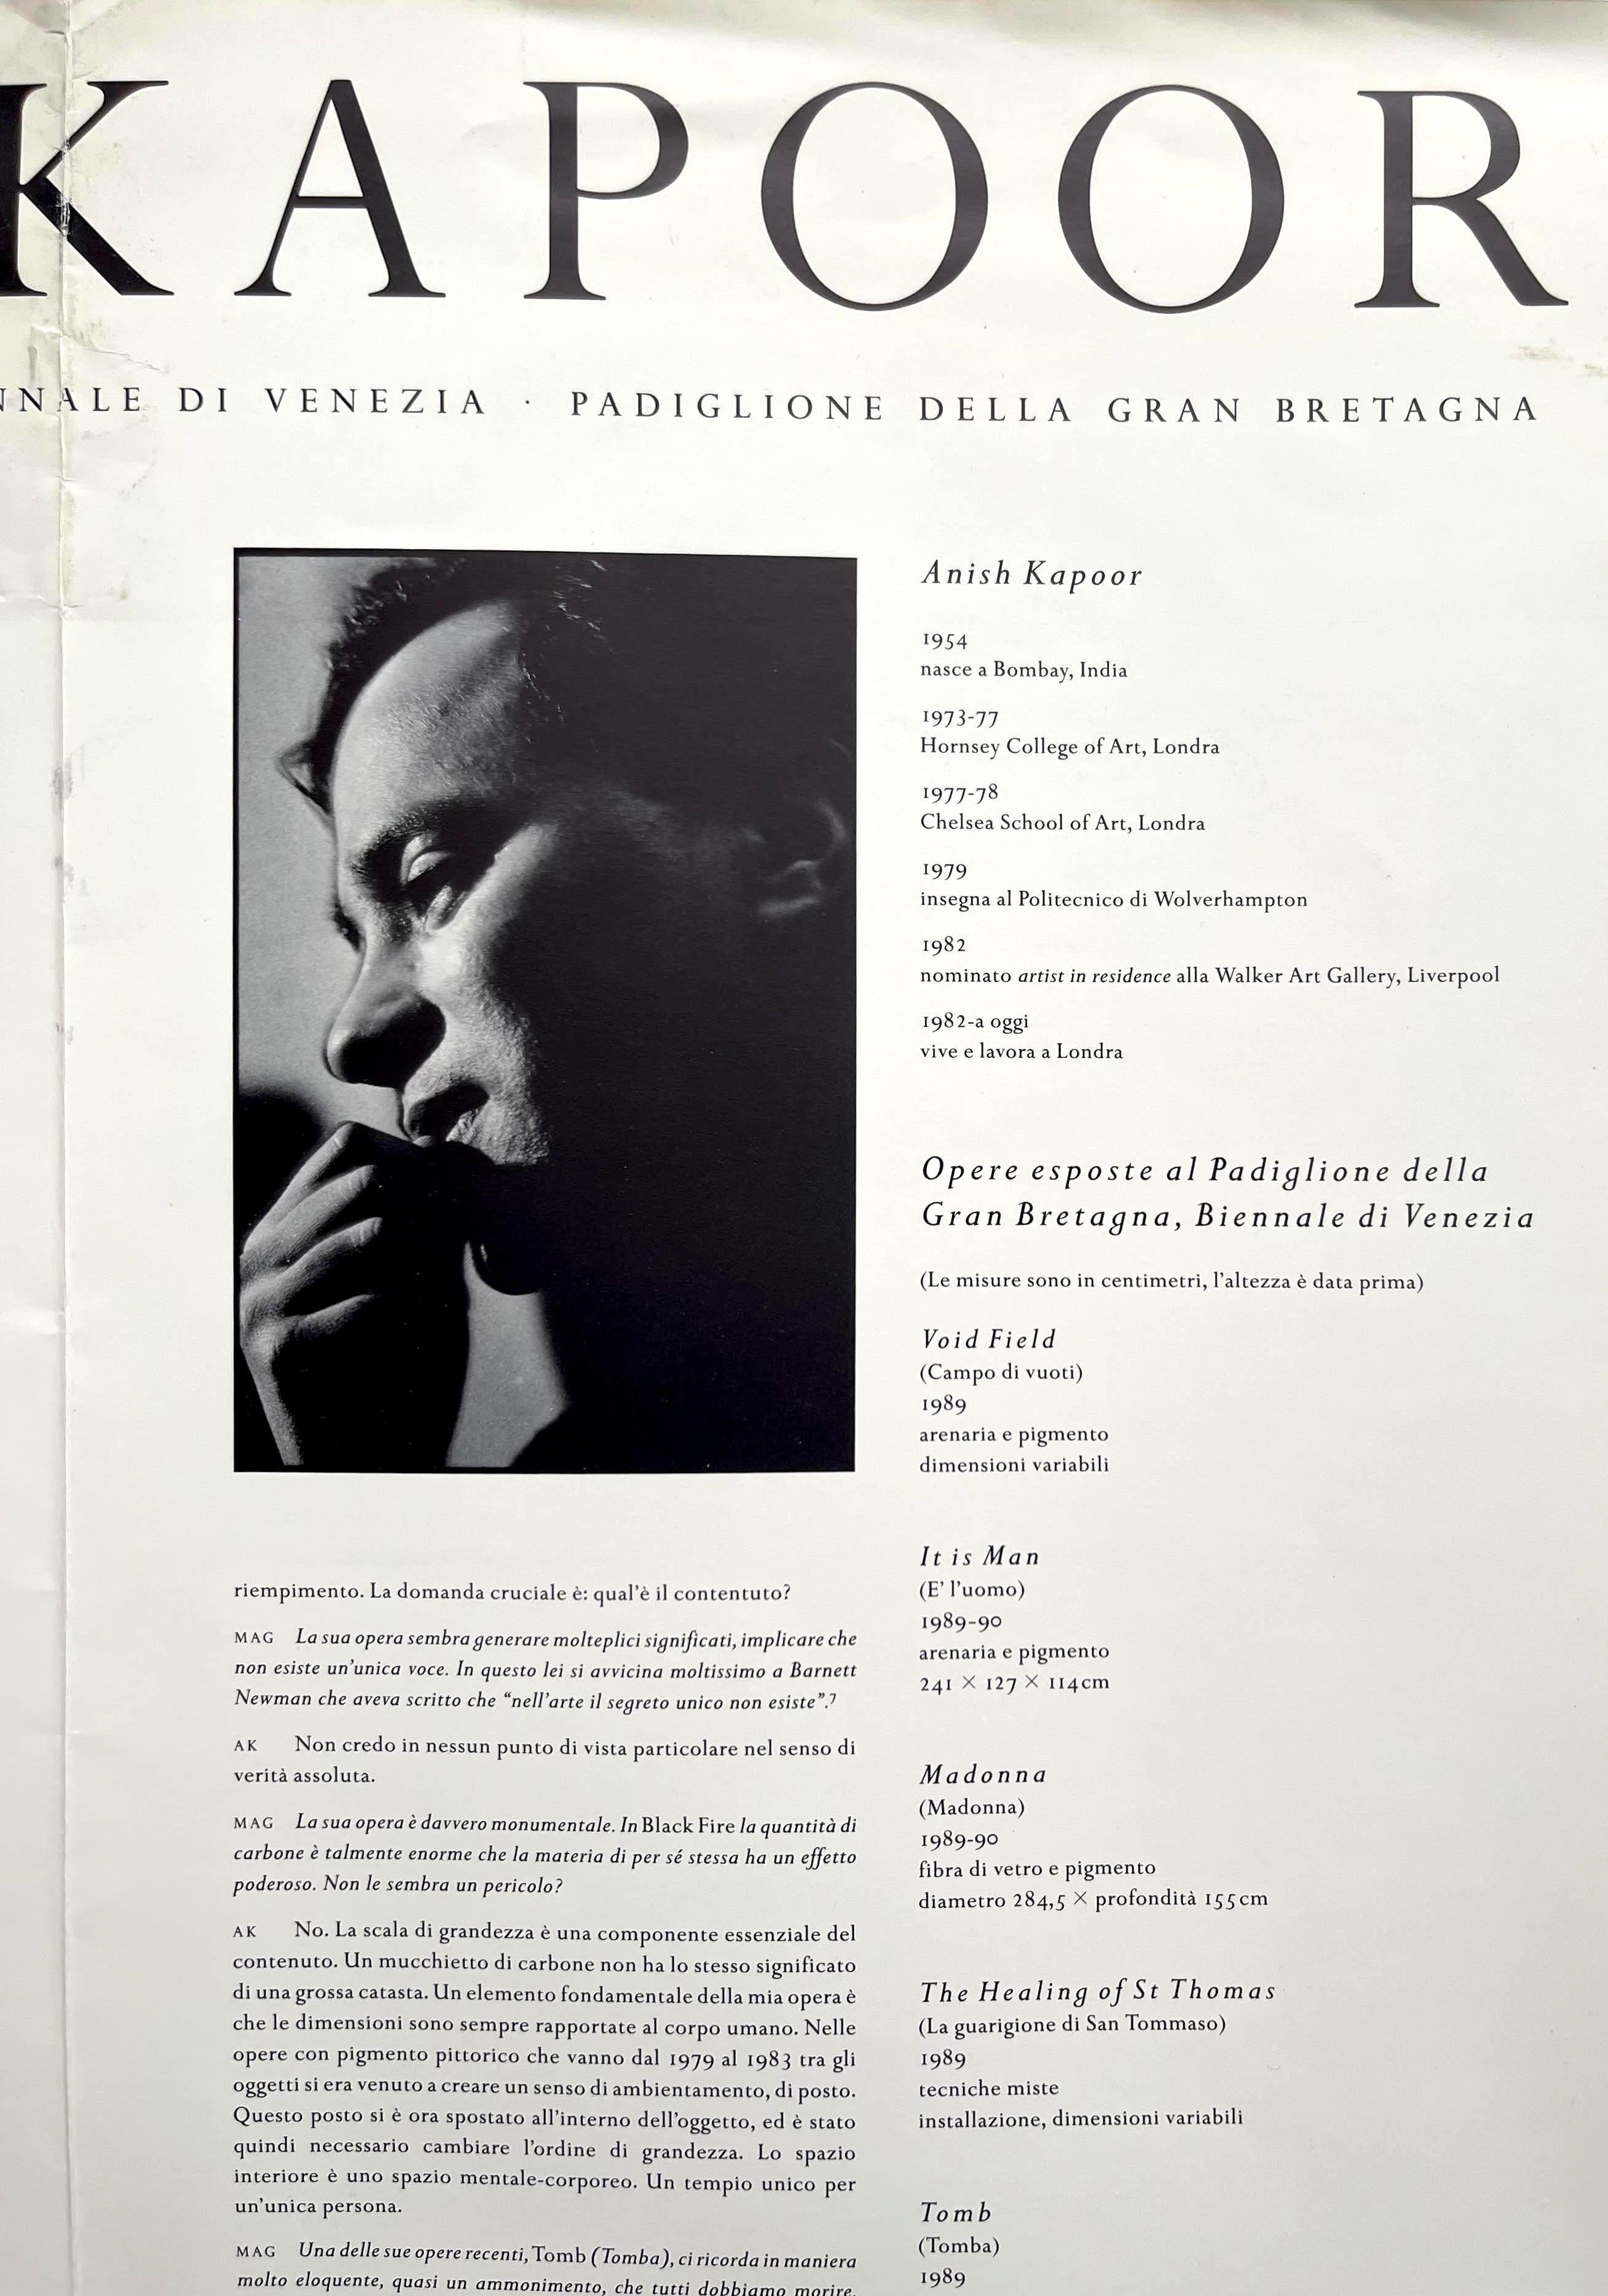 Anish Kapoor
Venice Biennale: XLIV Esposizione Internazionale D'arte Biennale Di Venezia (Hand signed and inscribed by Anish Kapoor), 1990
HISTORIC signed poster published on the occasion of Kapoor representing Great Britain at the Venice